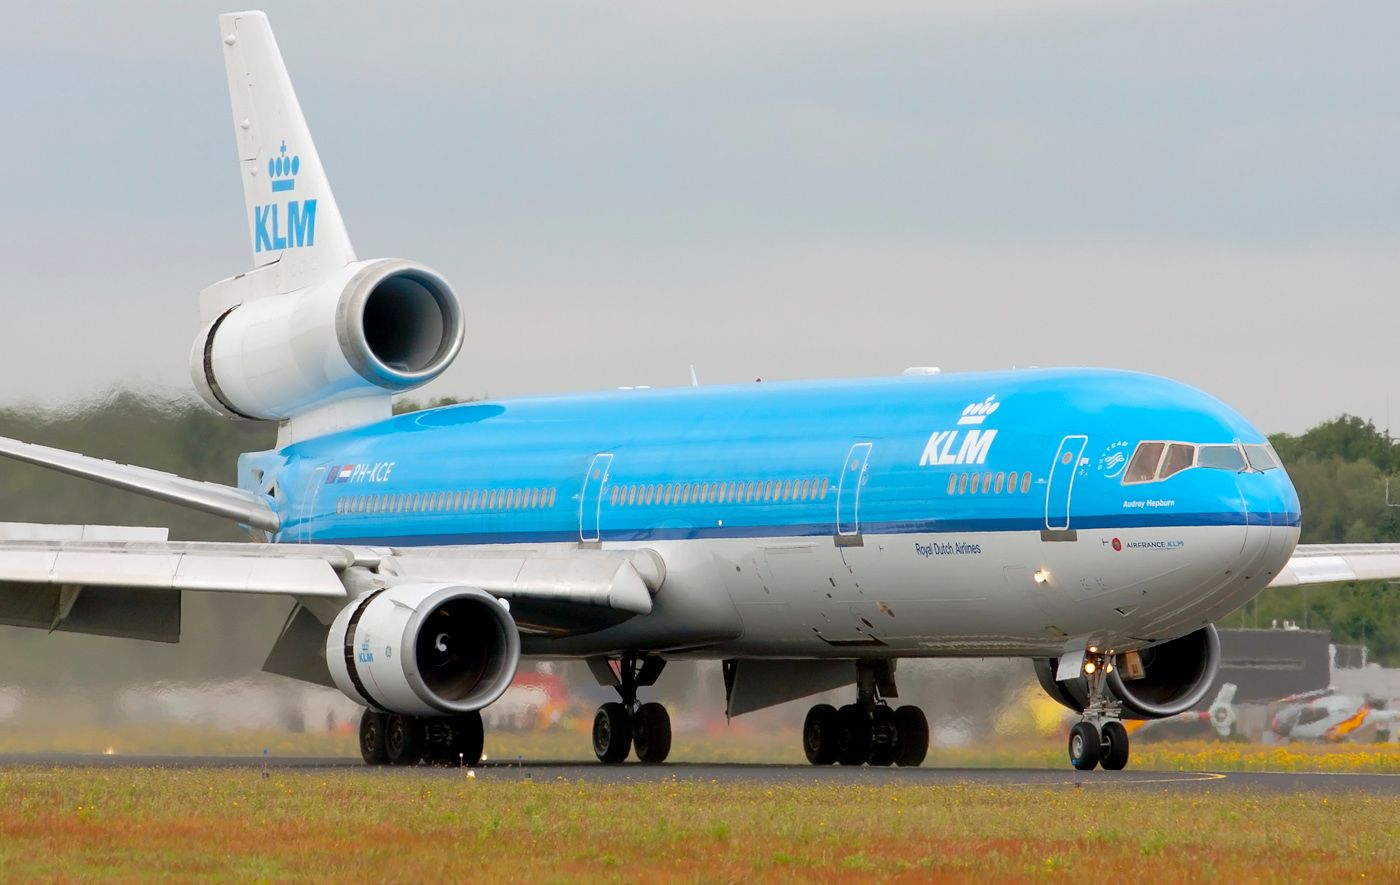 KLM MD-11 rolling out on landing